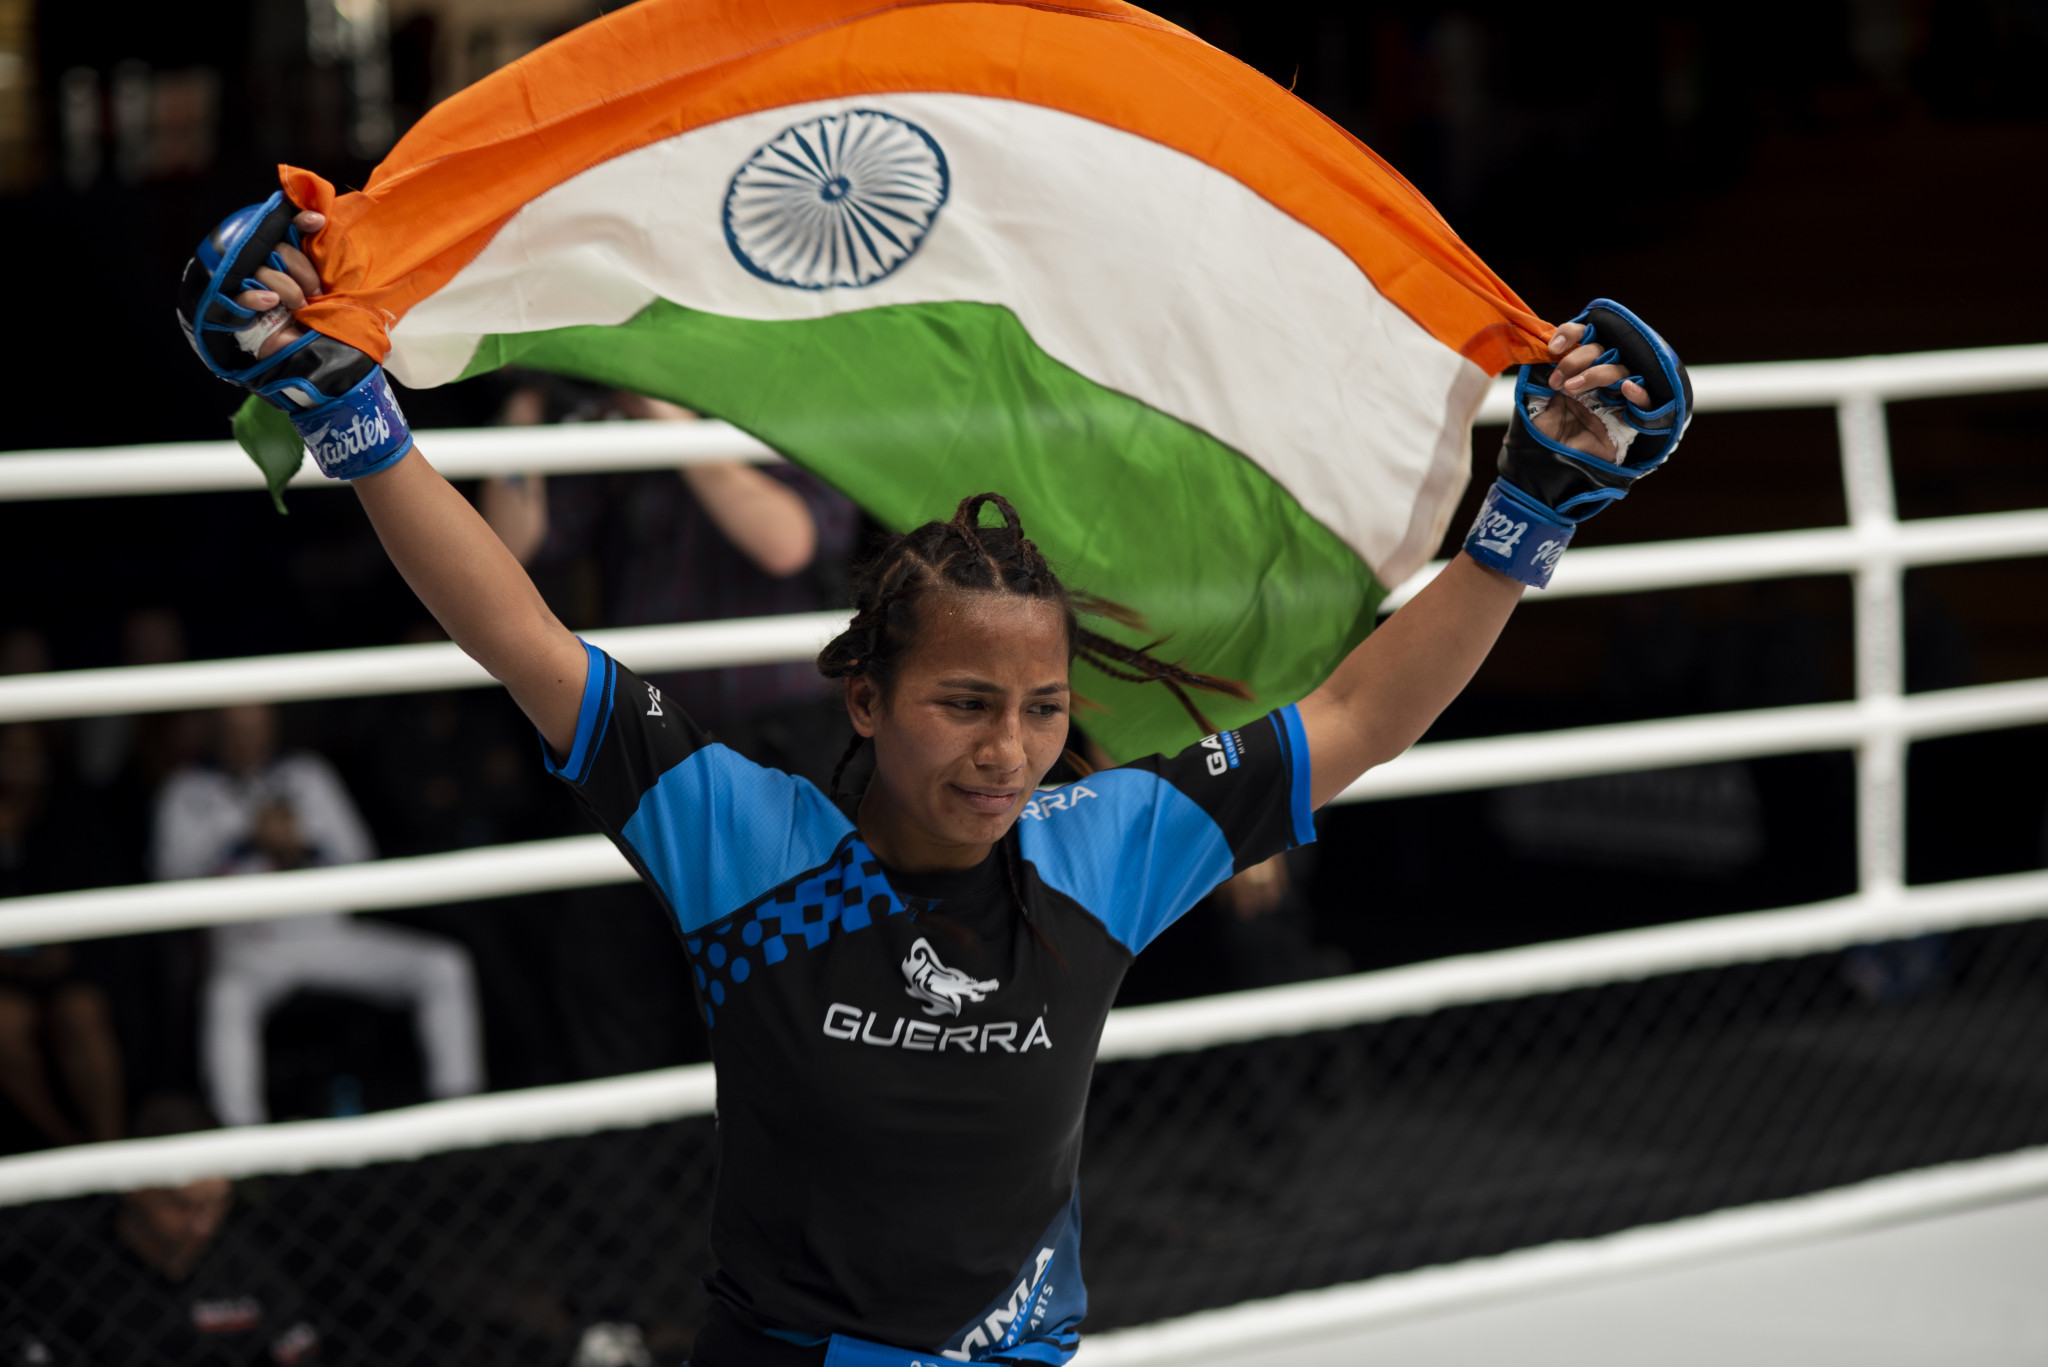 Devi Surbala Laishram bagged India's first gold of the event with a unanimous points victory against Kazakhstan's Tomiris Zhussupova in the women's under-52.2kg ©GAMMA